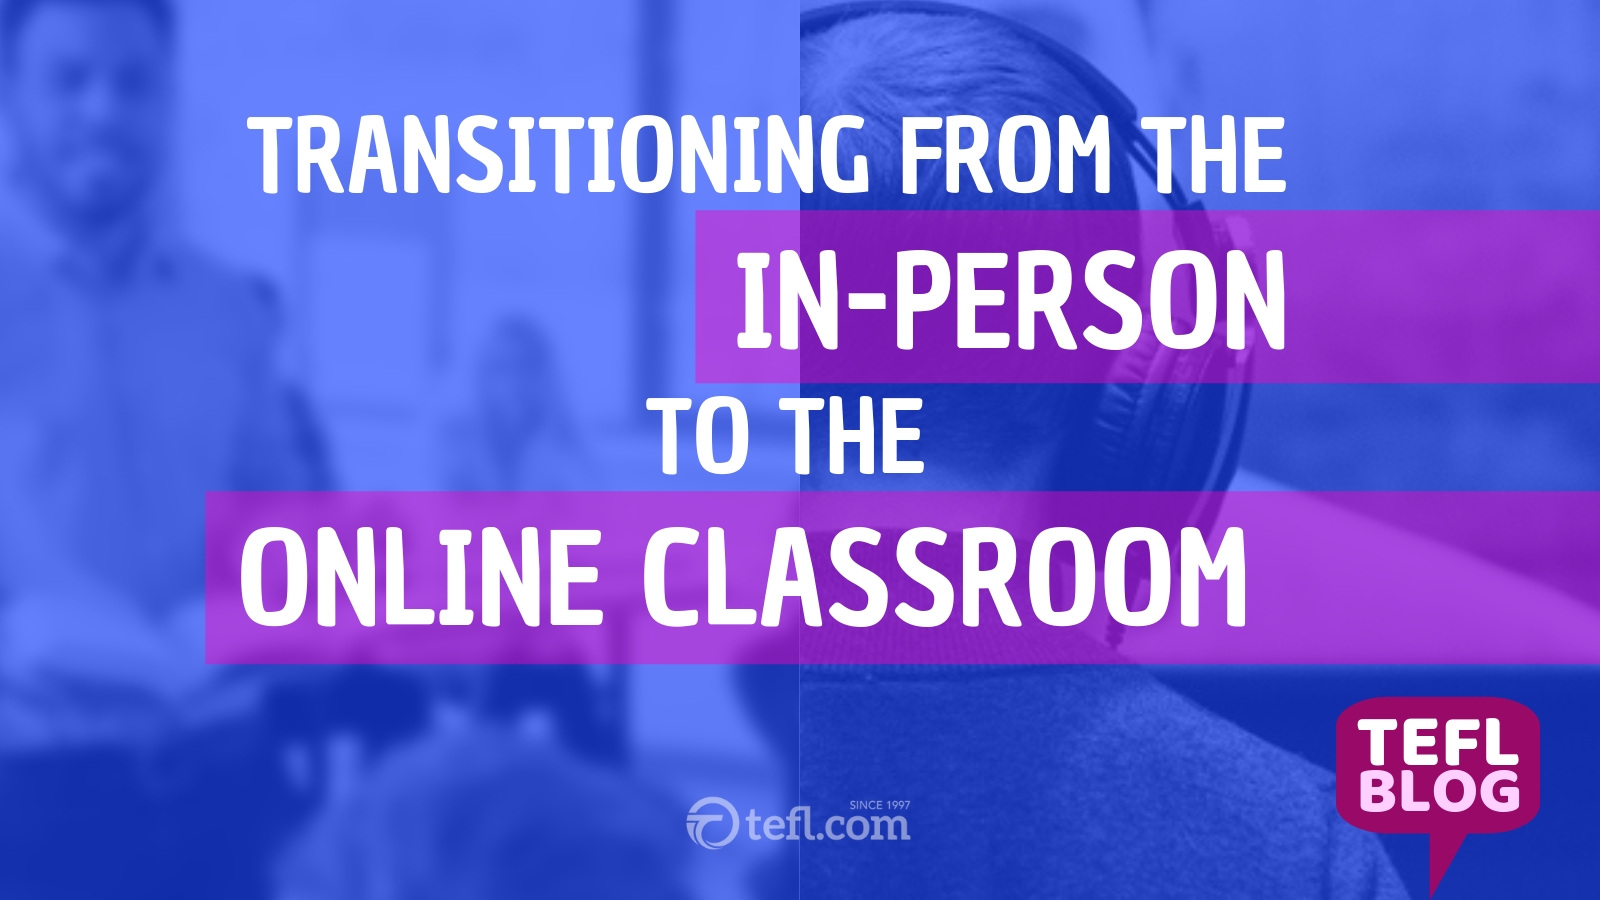 Transitioning from the in-person to the online classroom